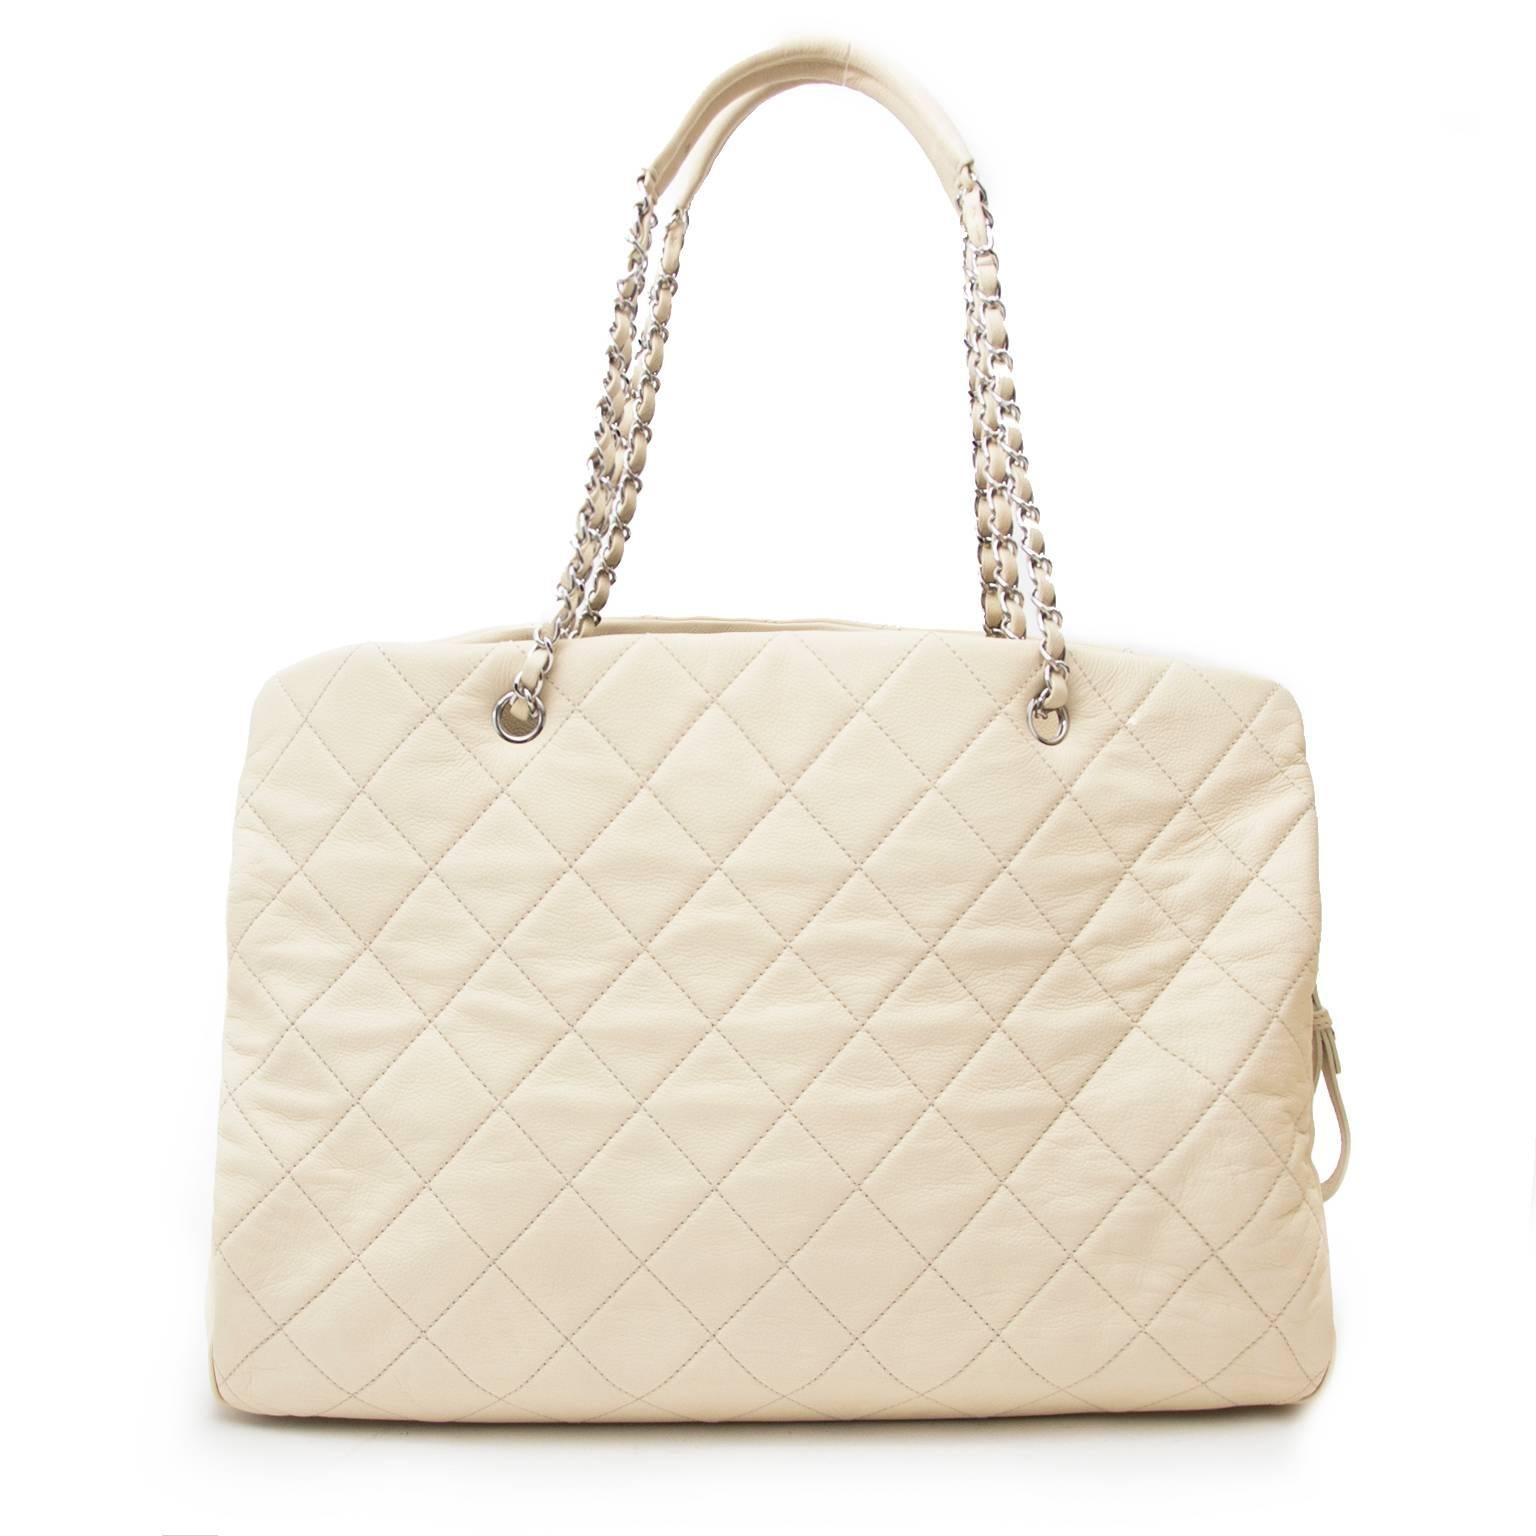 chanel beige tote